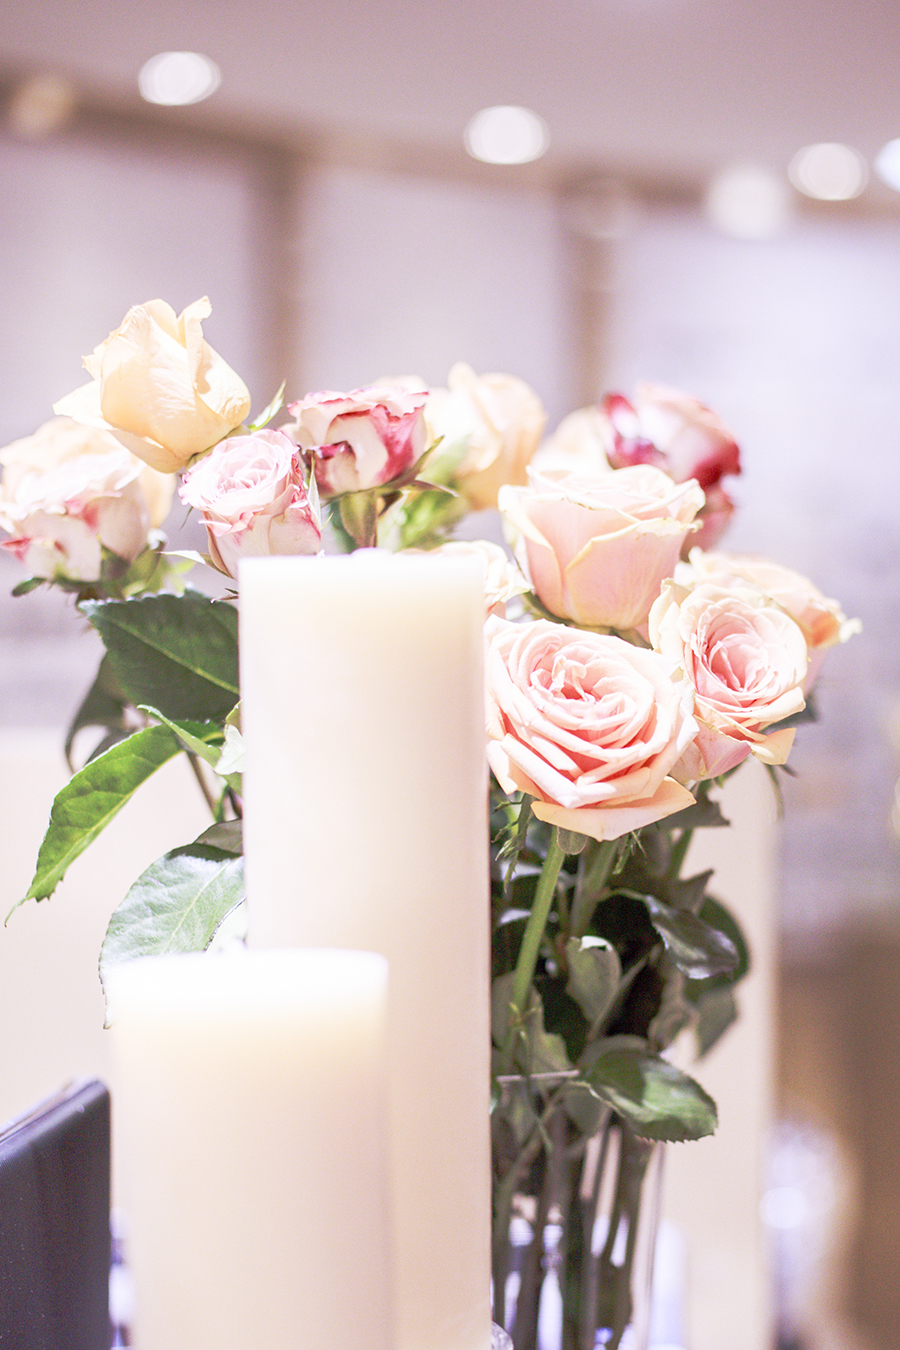 Candles and pastel roses at the Her World x Optic Butler Event, Paragon, Singapore.